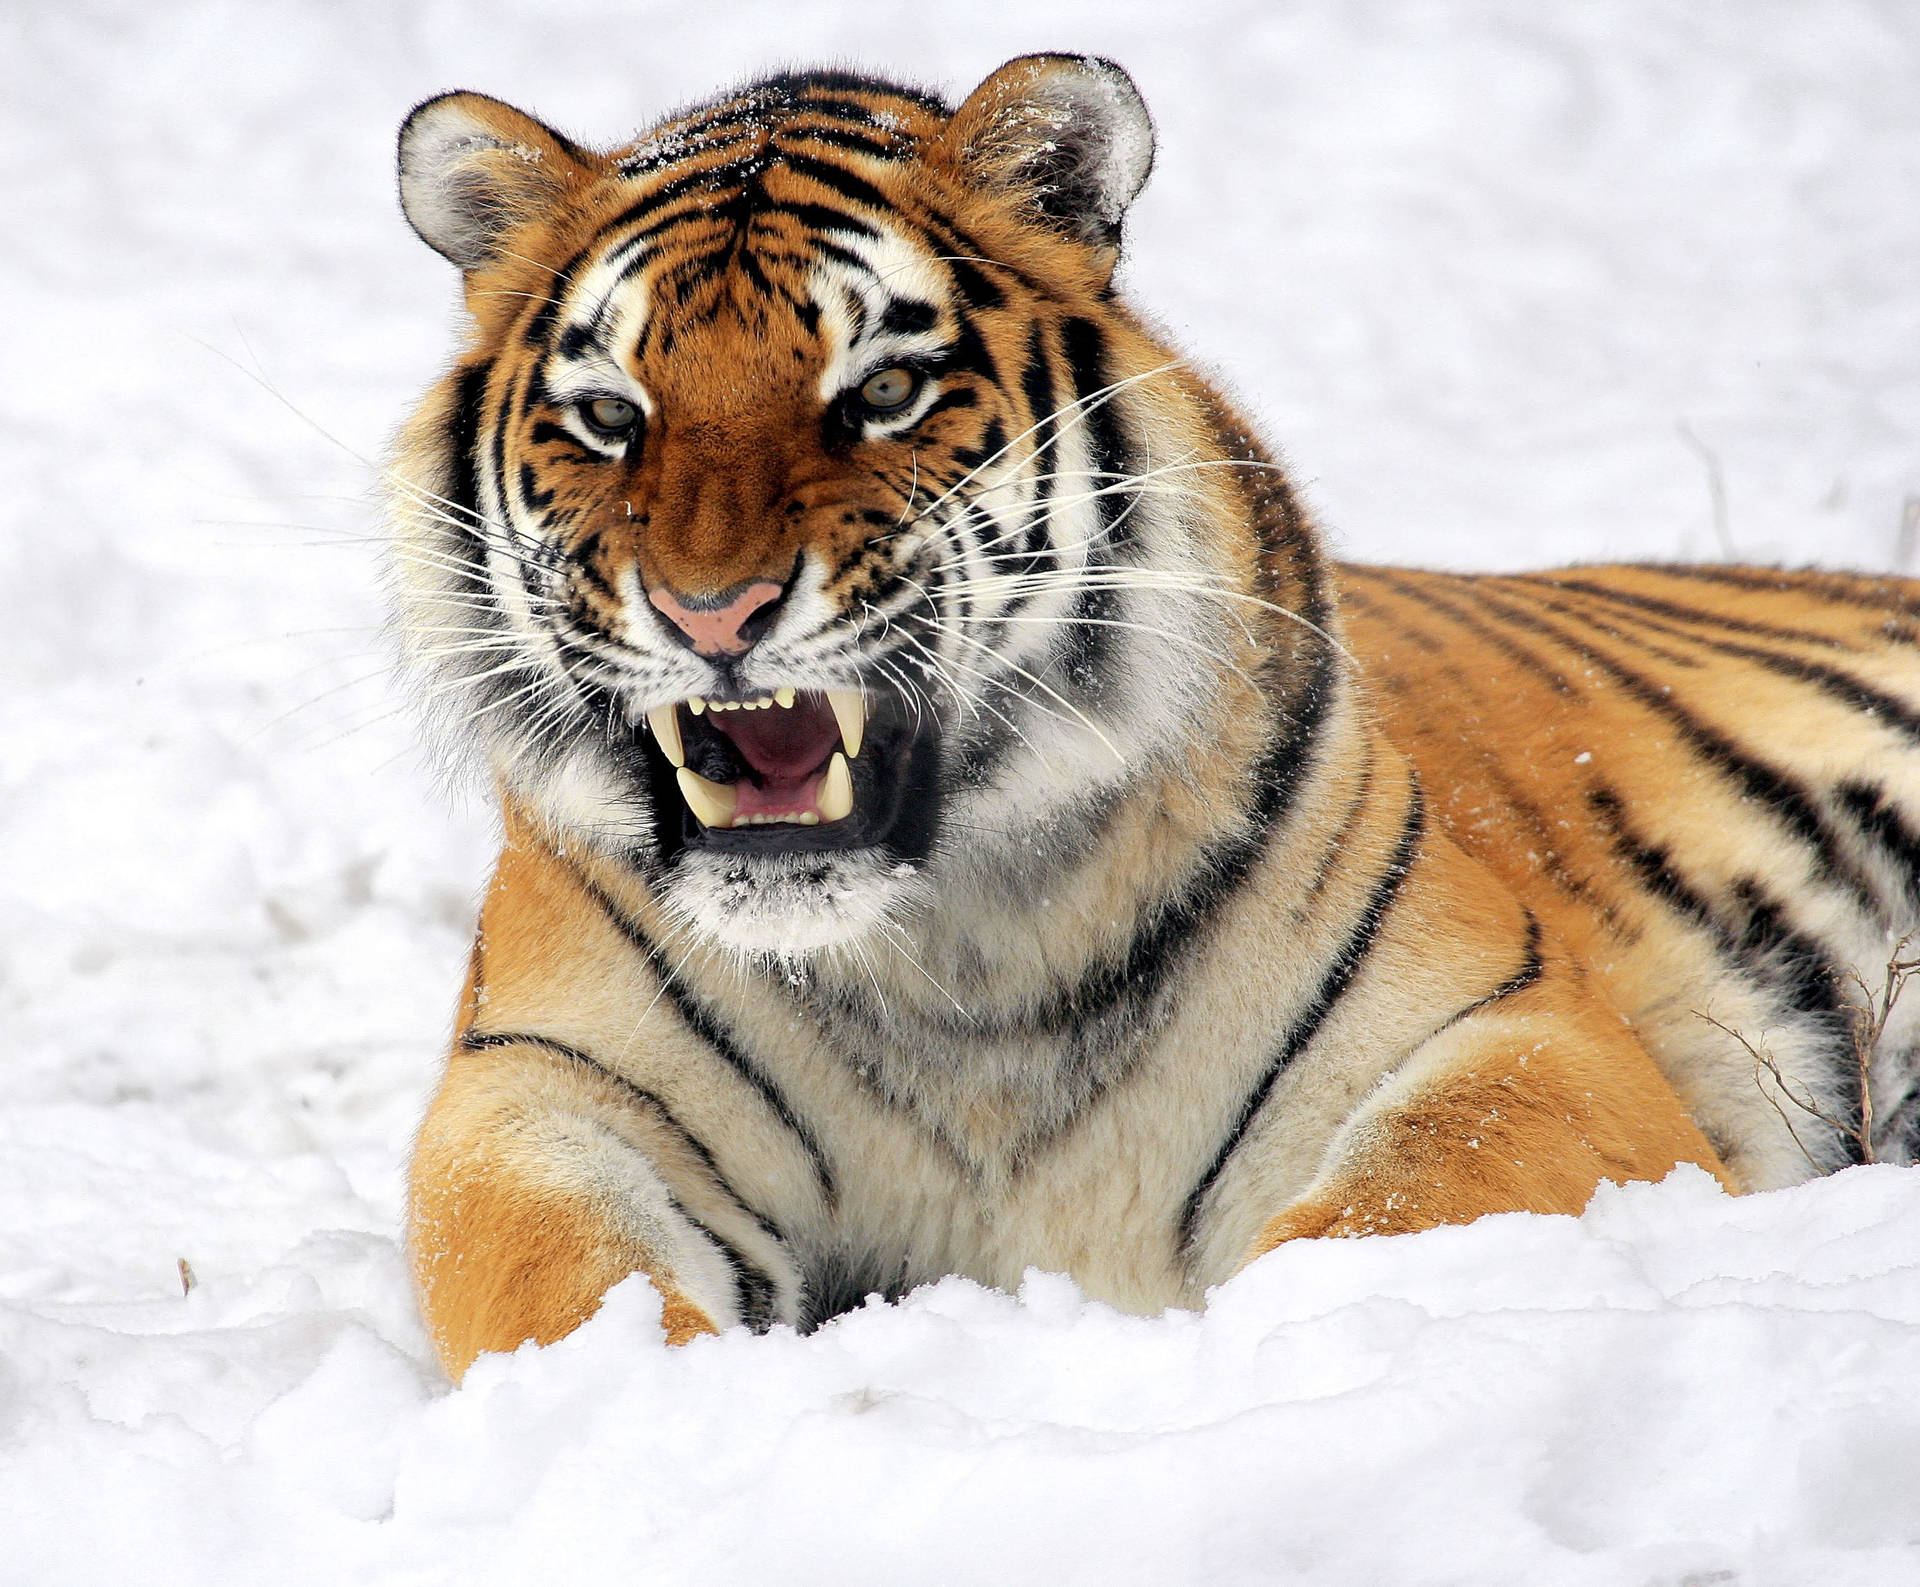 Free Tigers Hd Wallpaper Downloads, [100+] Tigers Hd Wallpapers for FREE |  